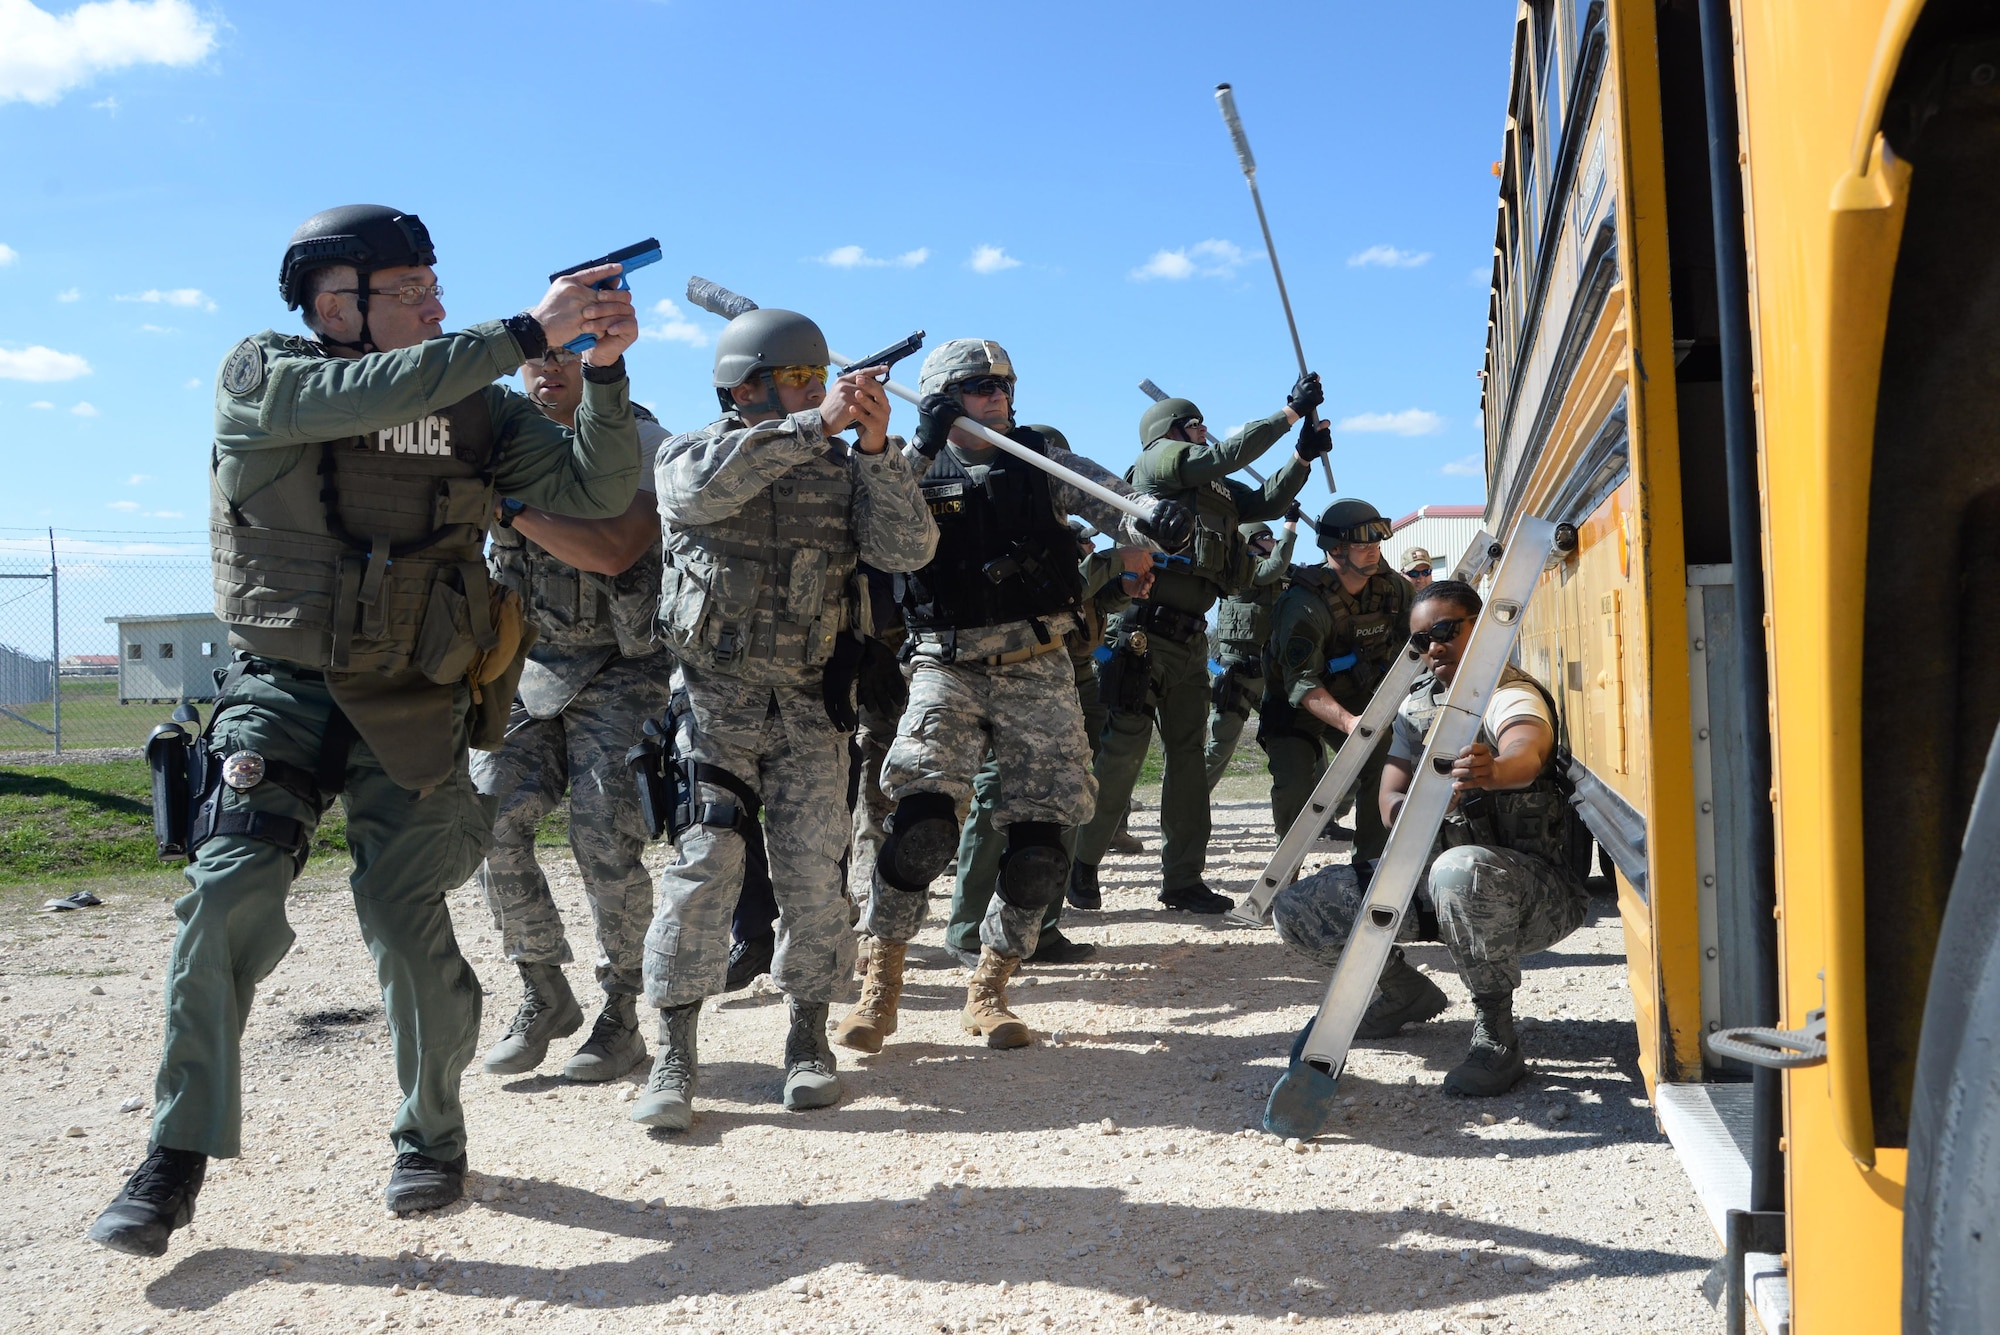 Members from the 902nd and 802nd Security forces Squadrons train with members of local police departments during a bus assault and hostage rescue exercise Feb. 19, 2015, at Joint Base San Antonio-Randolph, Texas. The local agencies involved in the exercise were from the cities of Live, Oak Universal City and Converse and the Judson Independent School District Police Departments. Security Forces and local police departments trained together to prepare for emergencies that require both military and civilian response efforts. (U.S. Air Force photo by Airman 1st Class Stormy Archer)